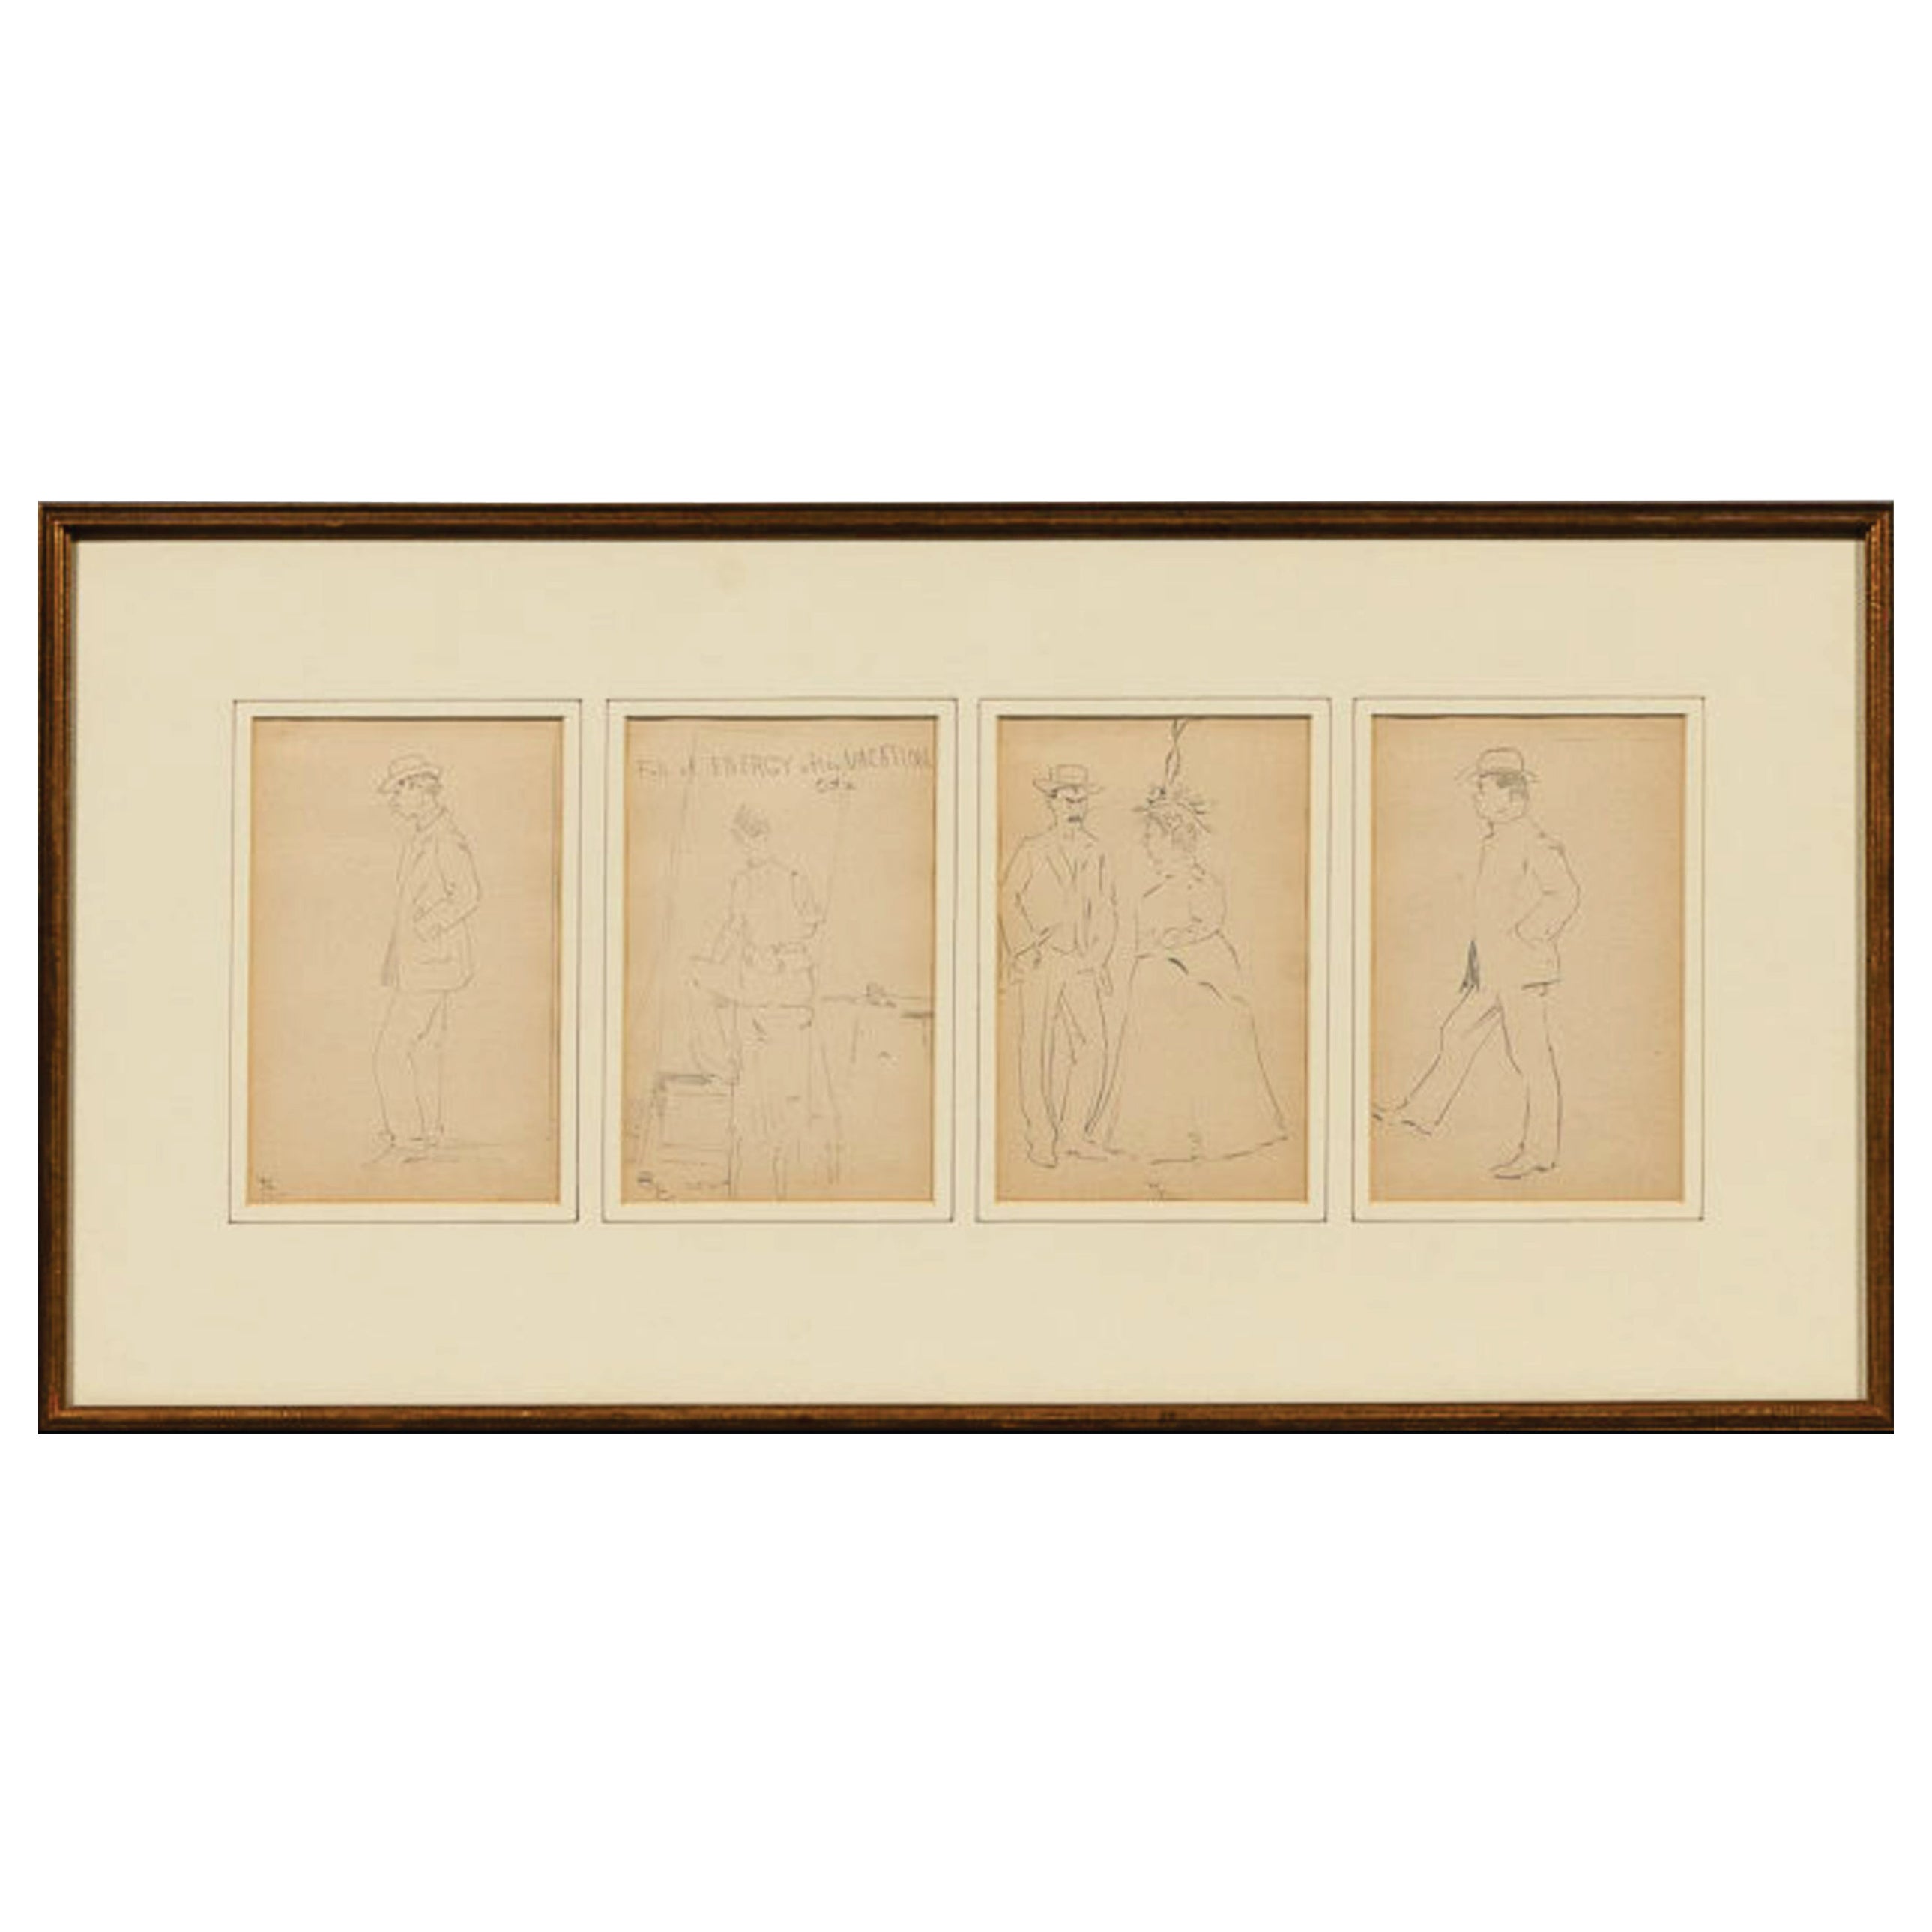 Antique William Worcester Churchill (1858 - 1926) 4 Drawings, 1908 signed 'WC' For Sale